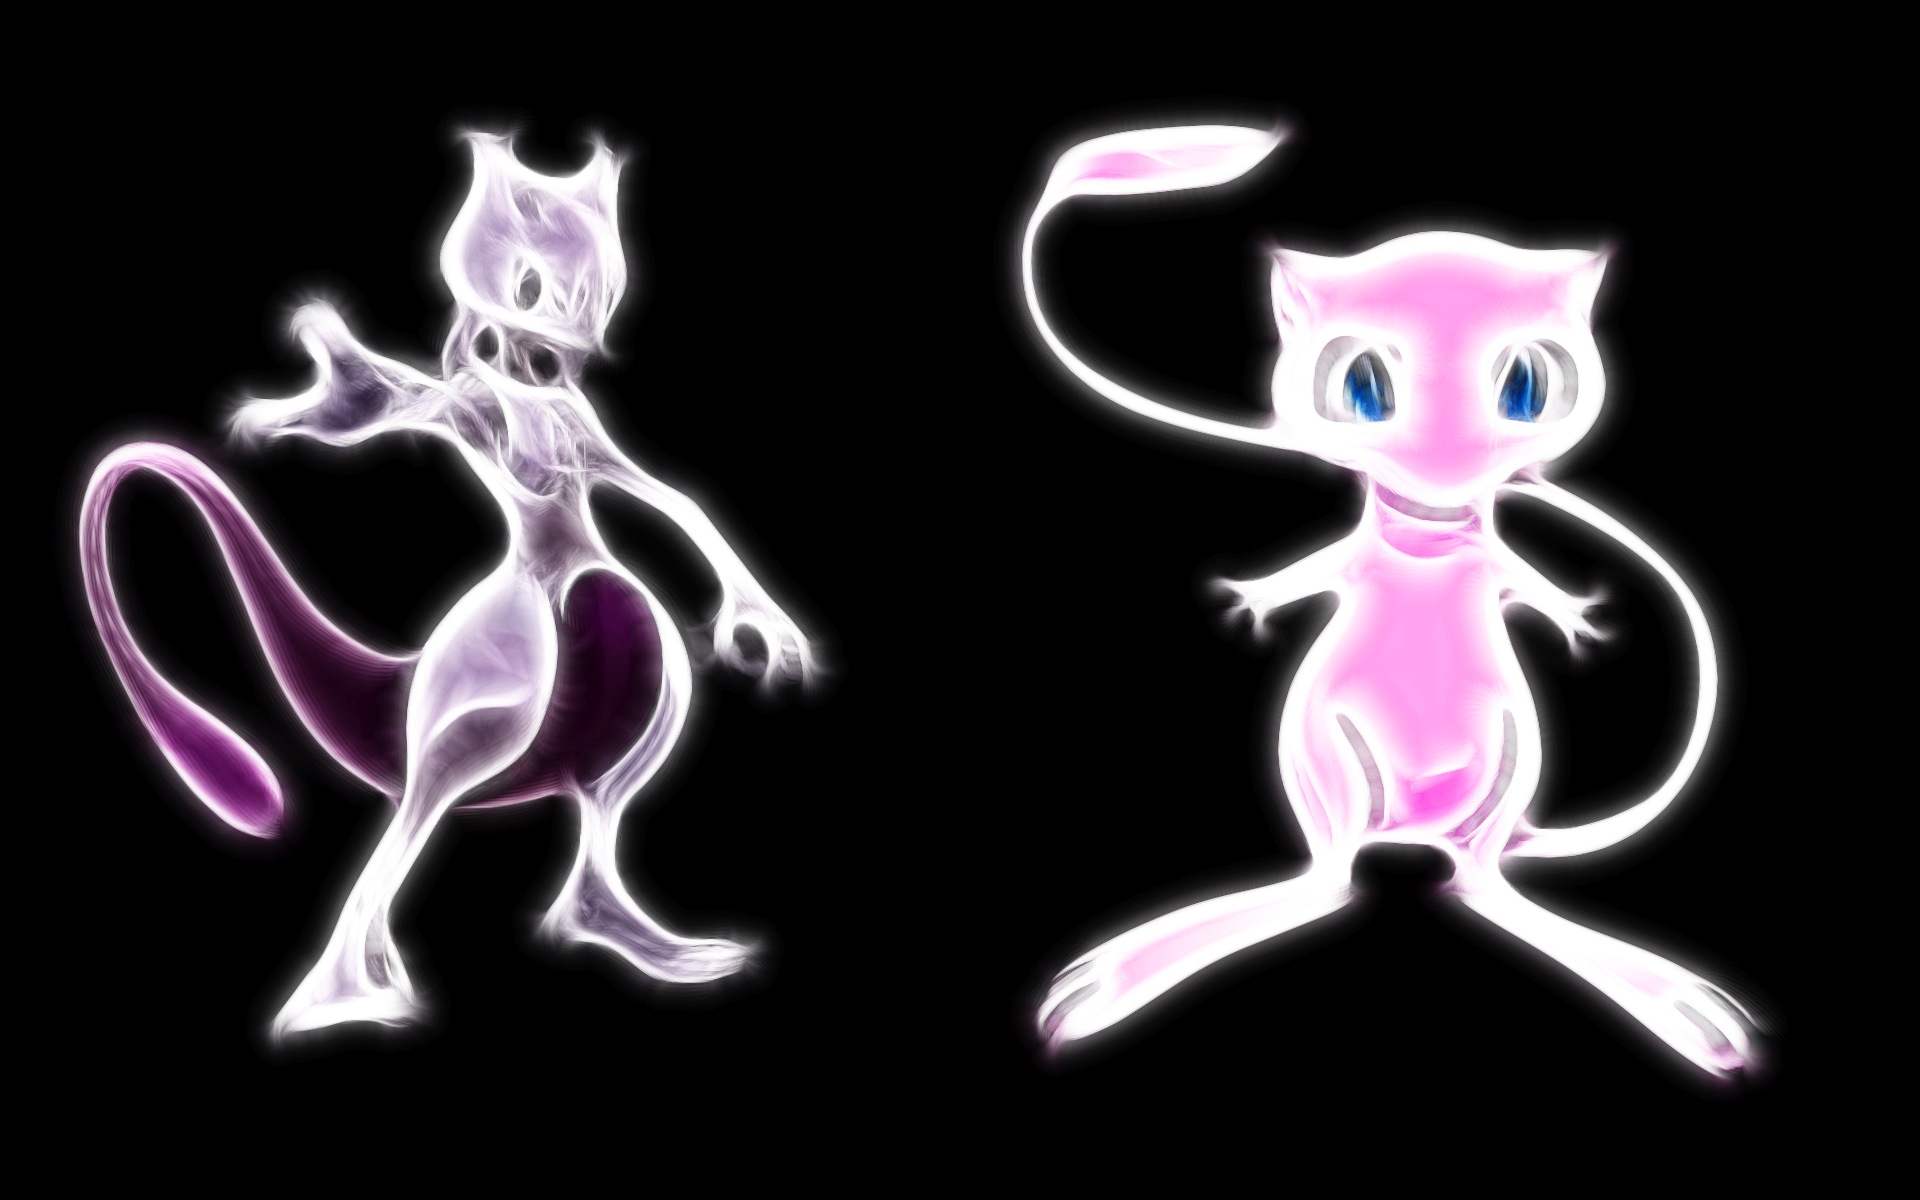 The Pokemon Anime Wallpaper Titled Mewtwo And Mew